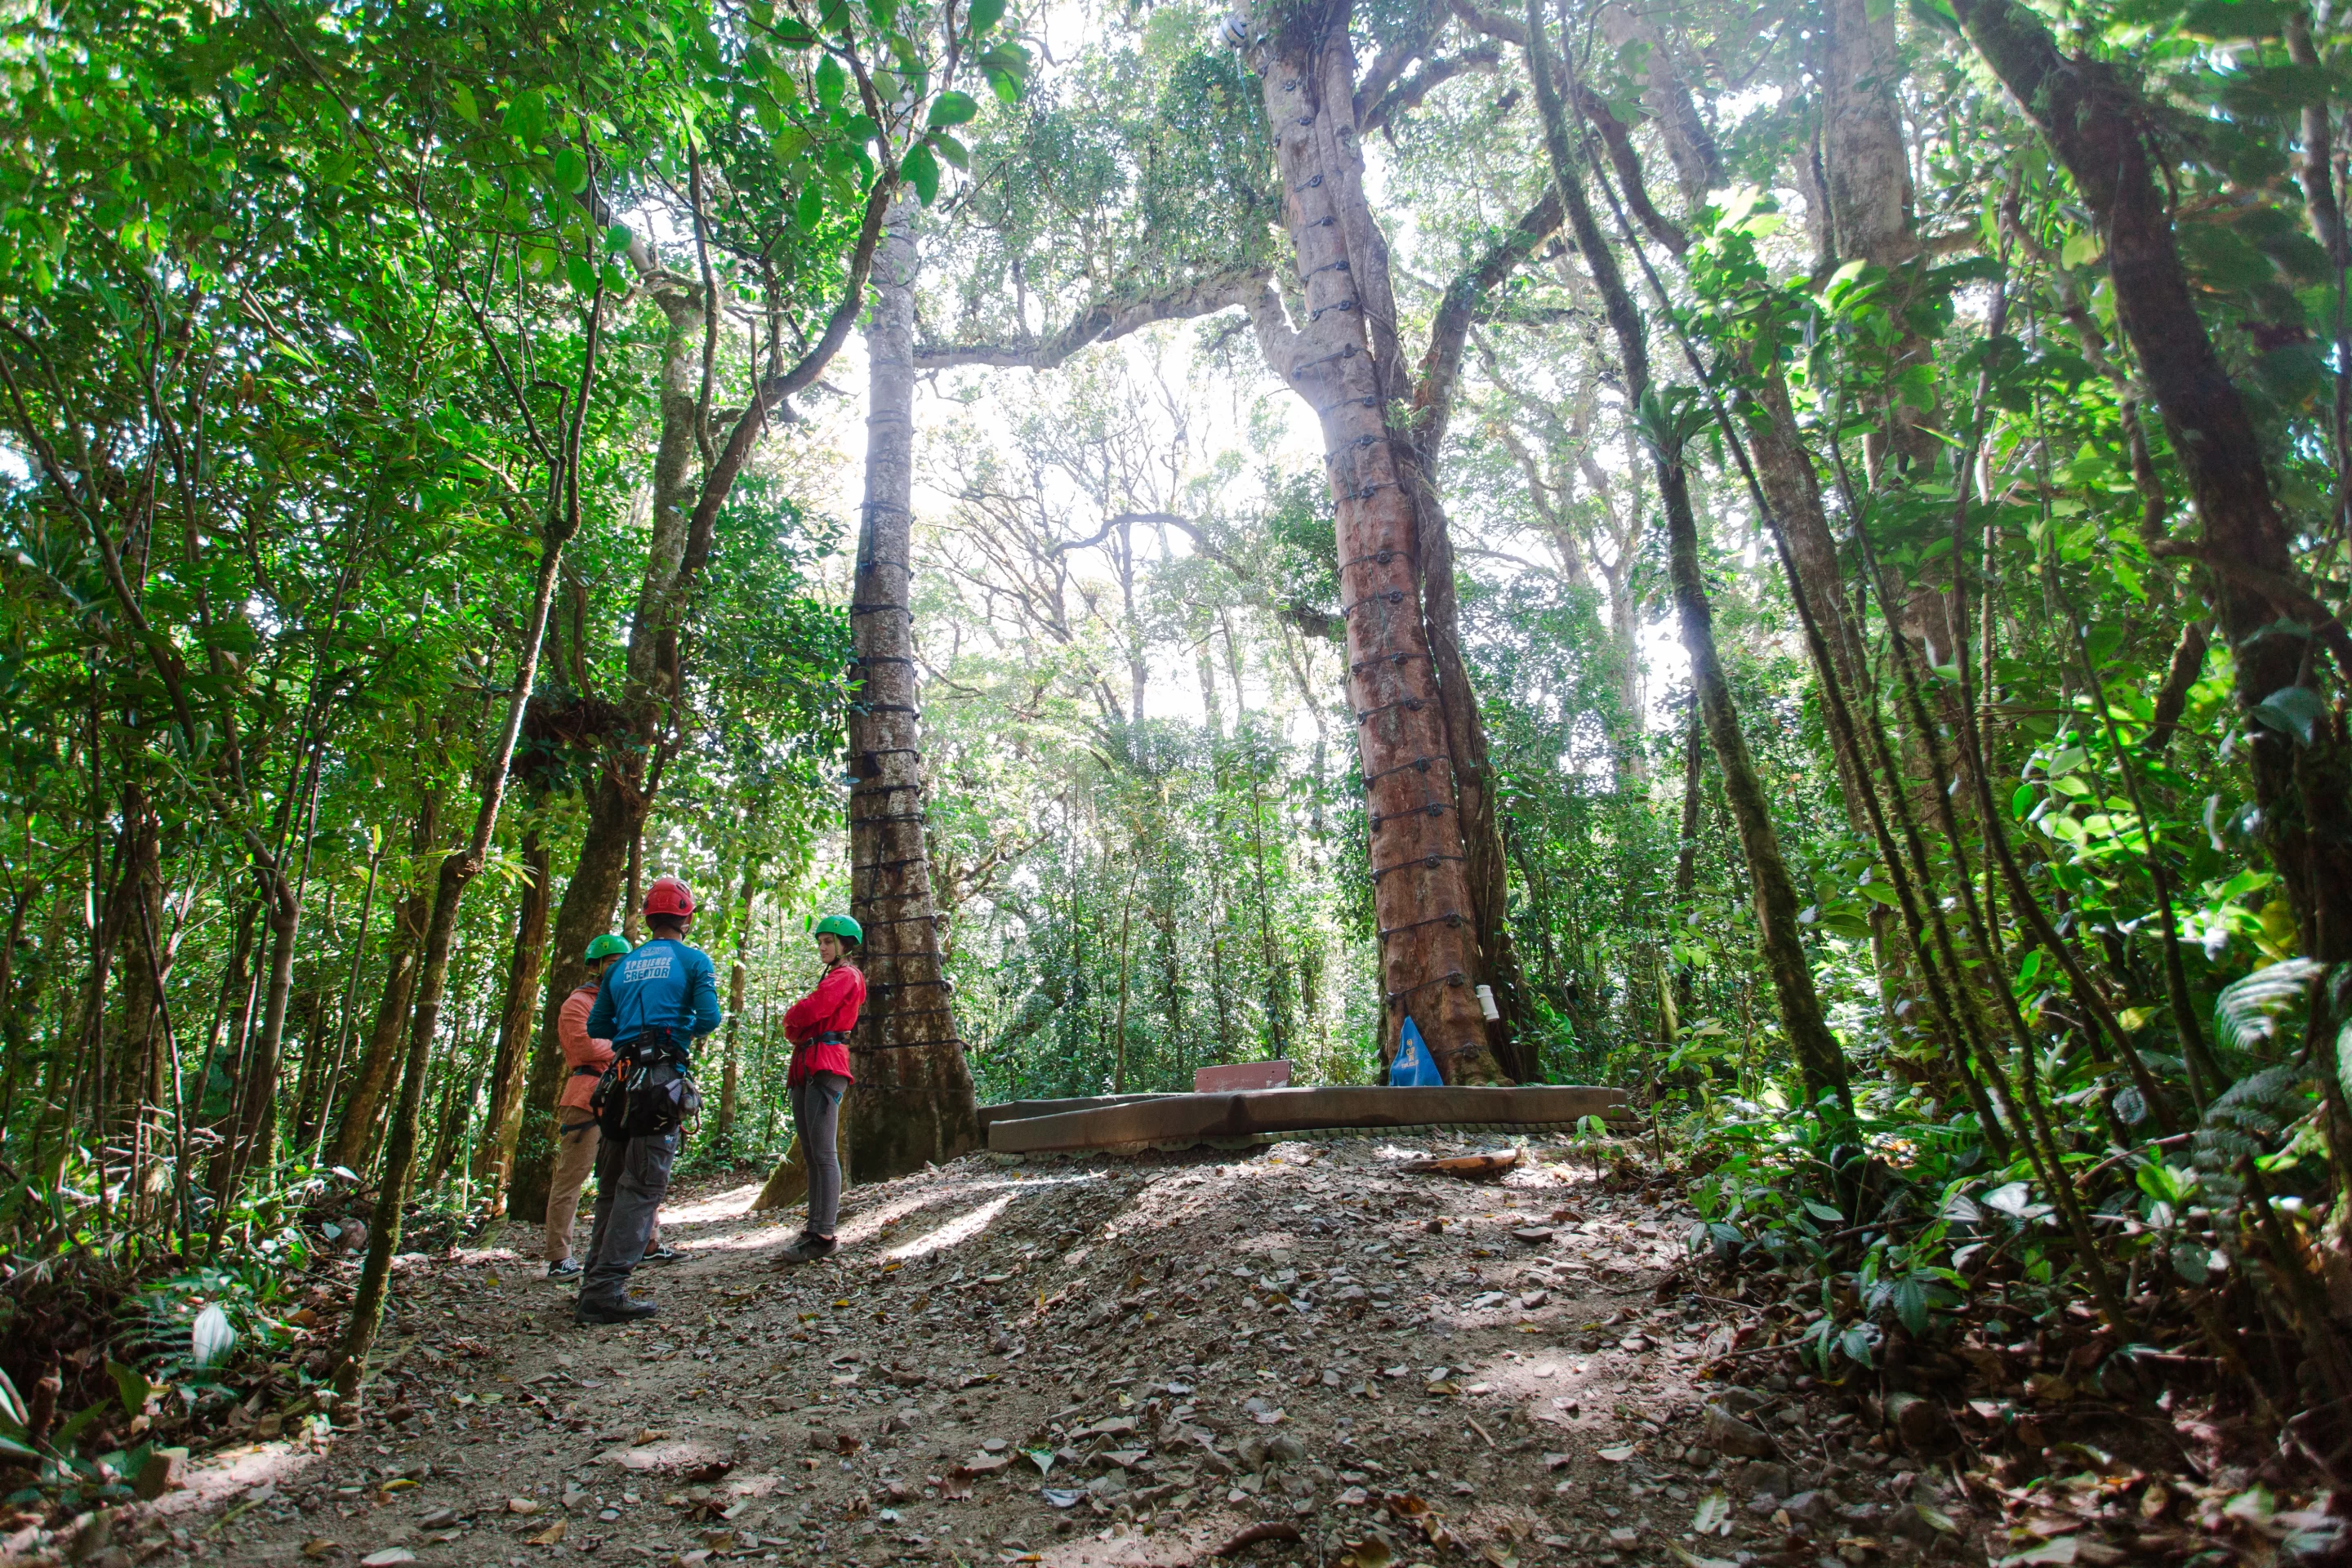 Discover the rich biodiversity and natural wonders of the cloud forest of Costa Rica.